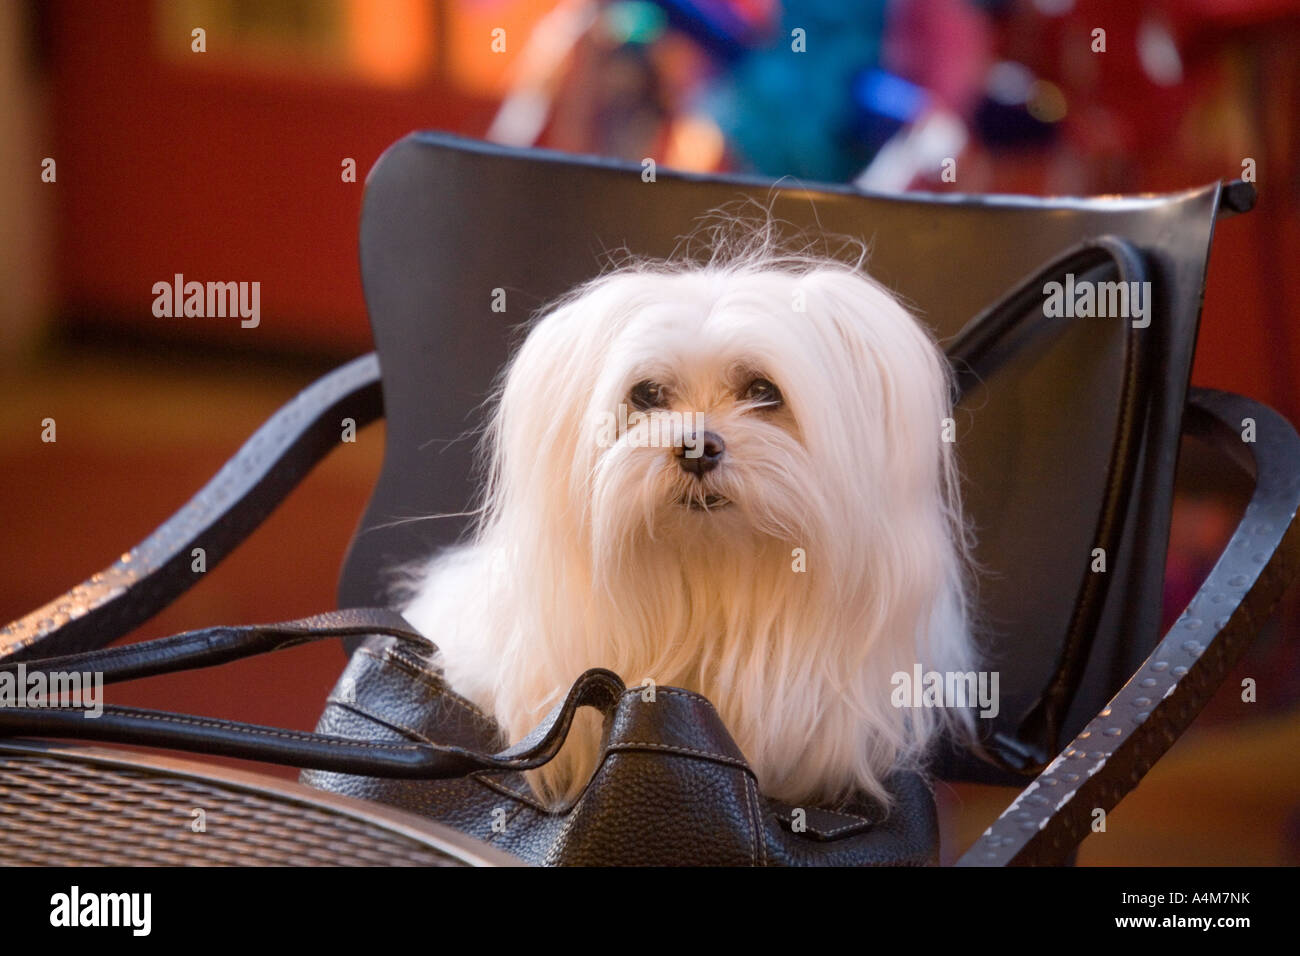 A fluffy white Maltese dog sits inside a woman's purse at an outdoor  restaurant. Stock Photo